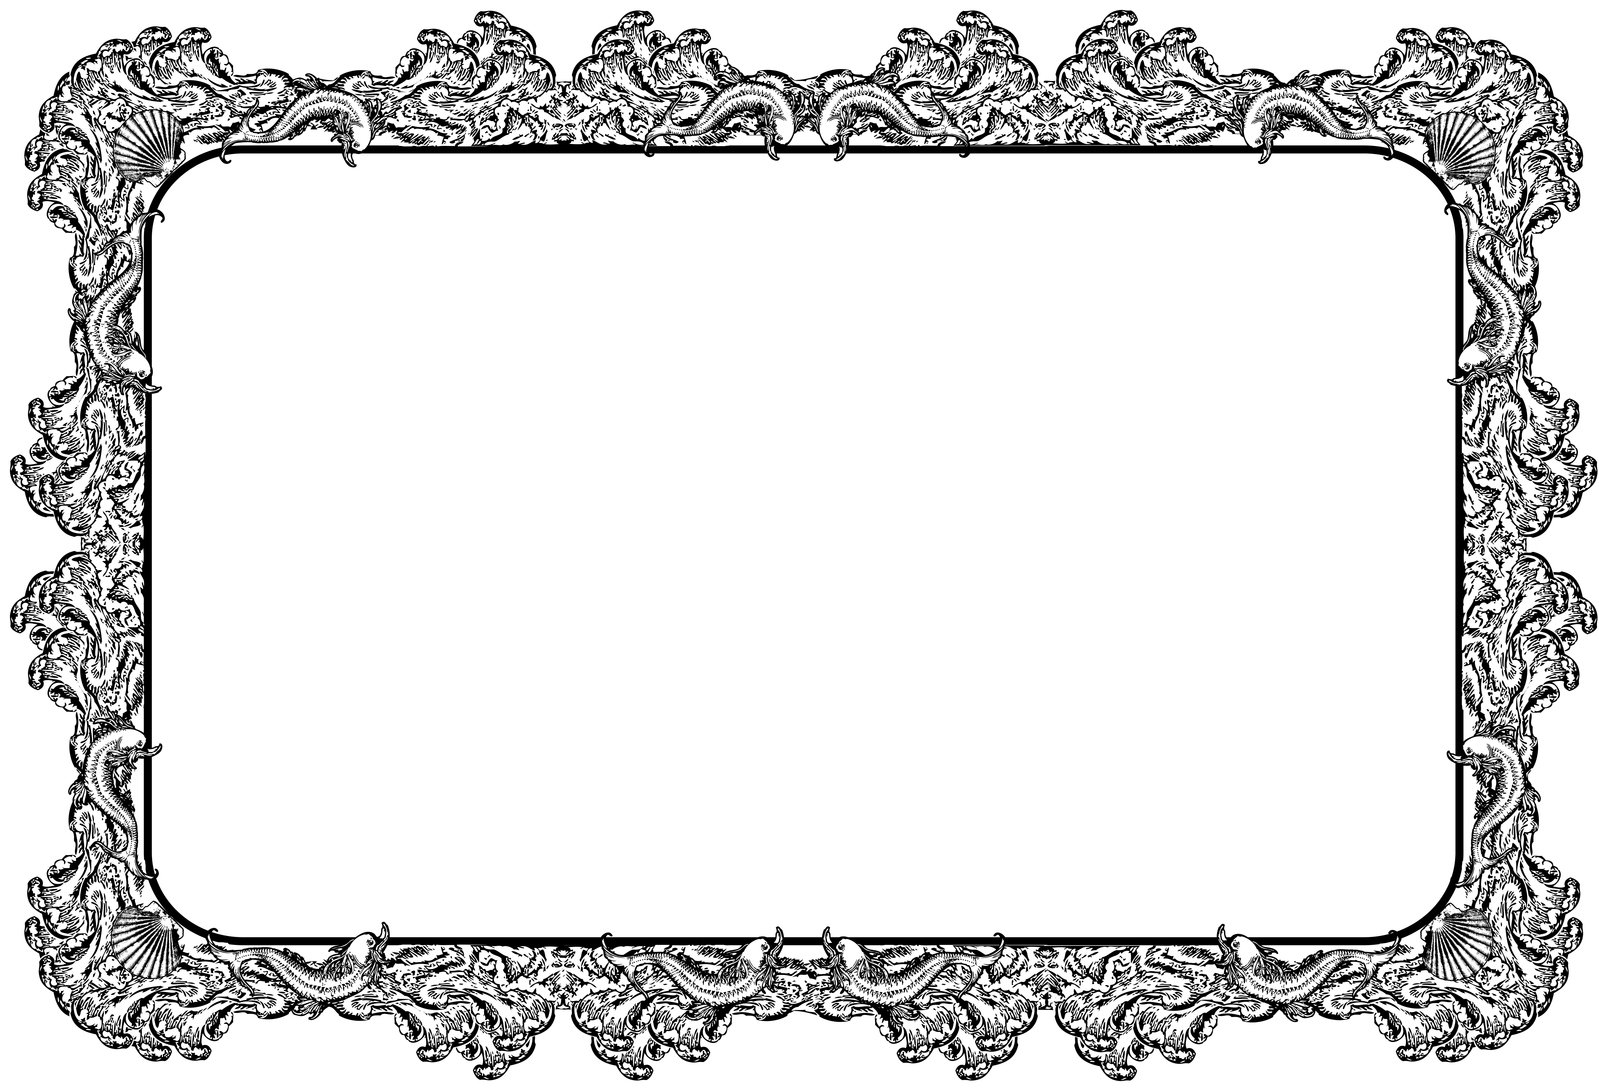 a picture frame with an ornate border around it